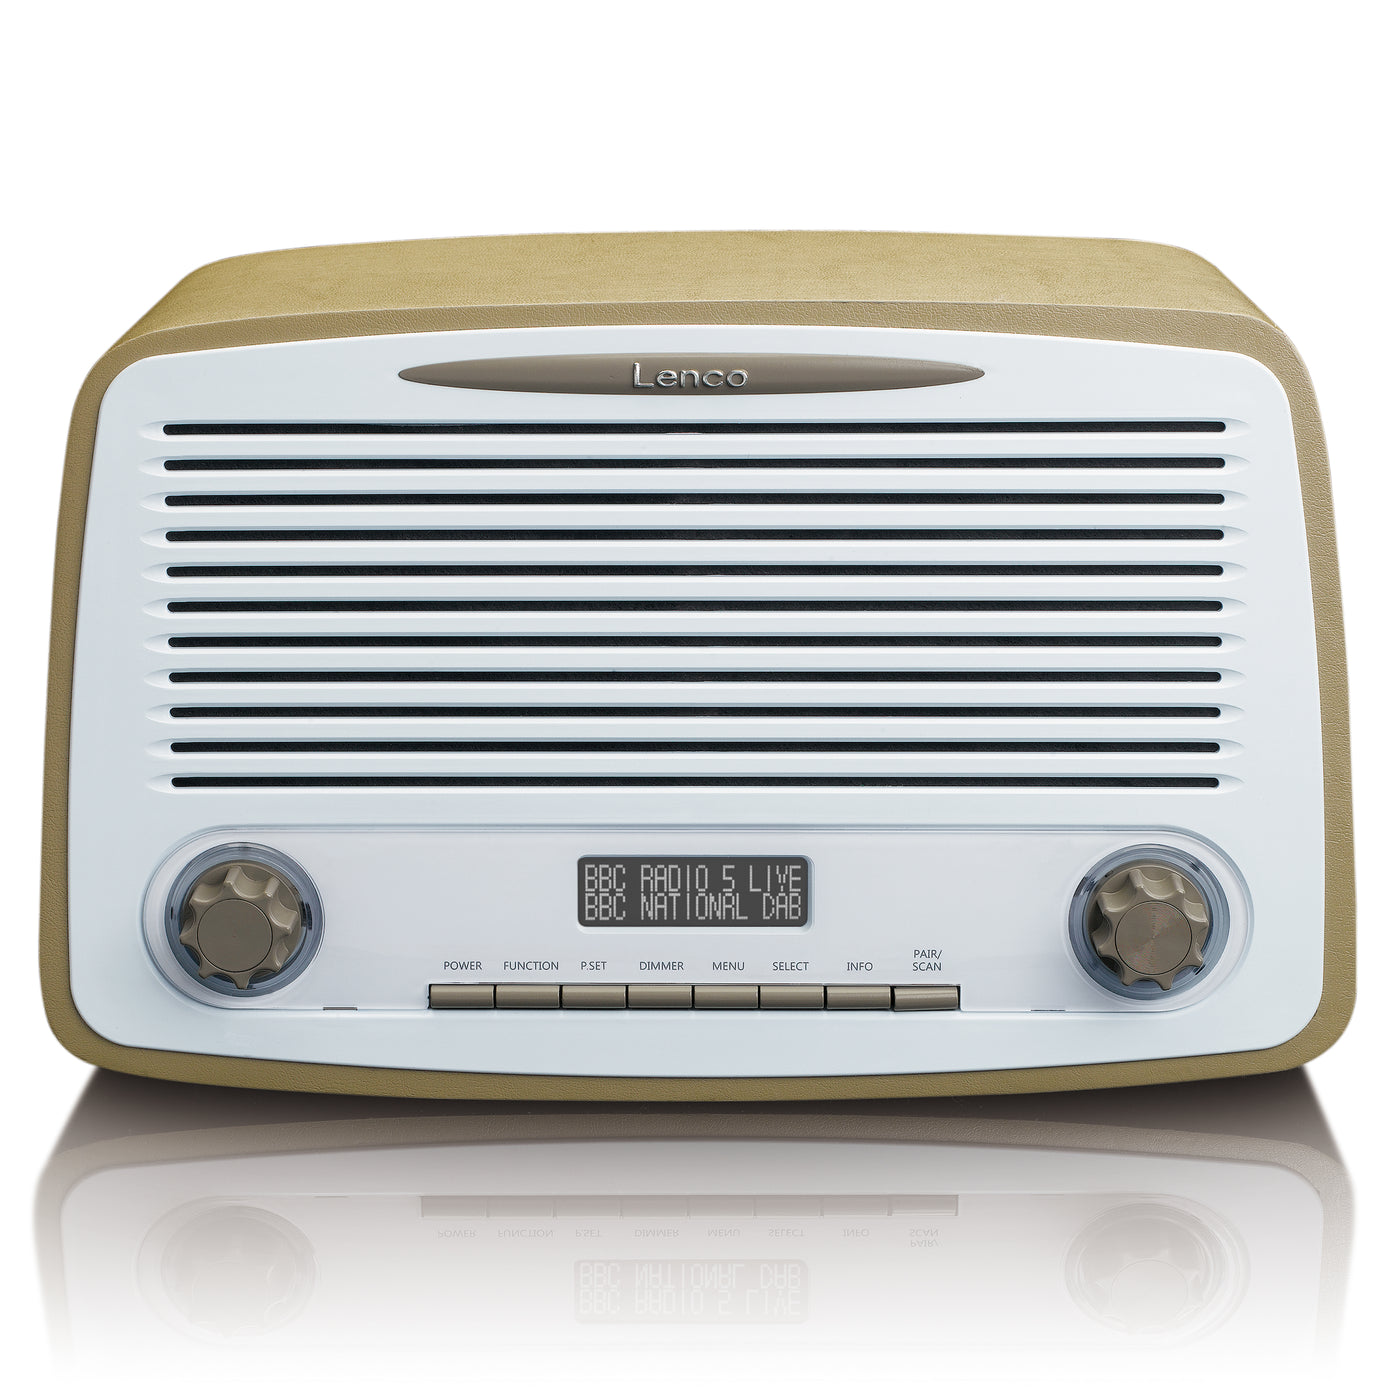 LENCO DAR-012TP - DAB+ FM Radio with Bluetooth®, AUX input and Alarm Function - Taupe